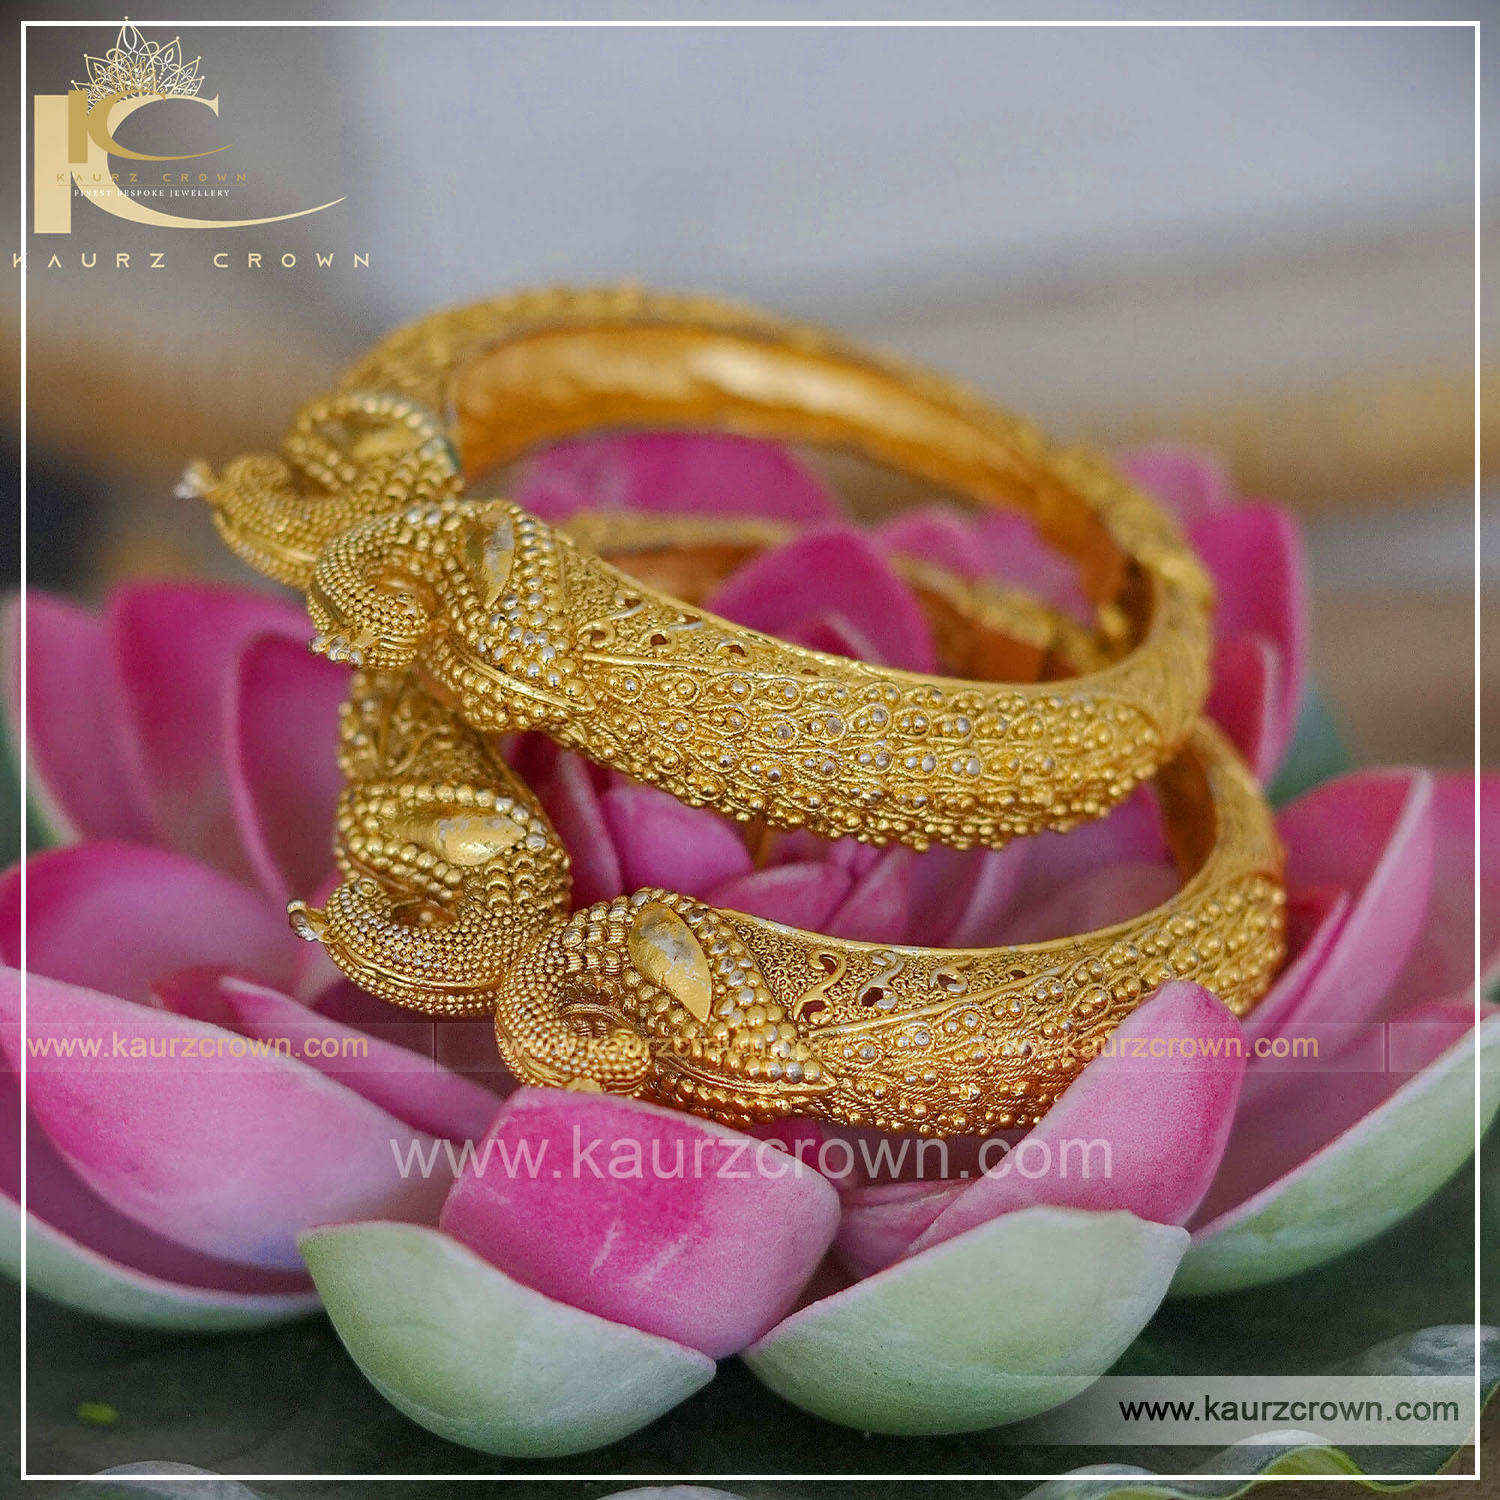 Morni Traditional Antique Gold Plated Bangles , kaurz crown , gold plated jewellery , kaurz crown jewellery store, online jewellery store